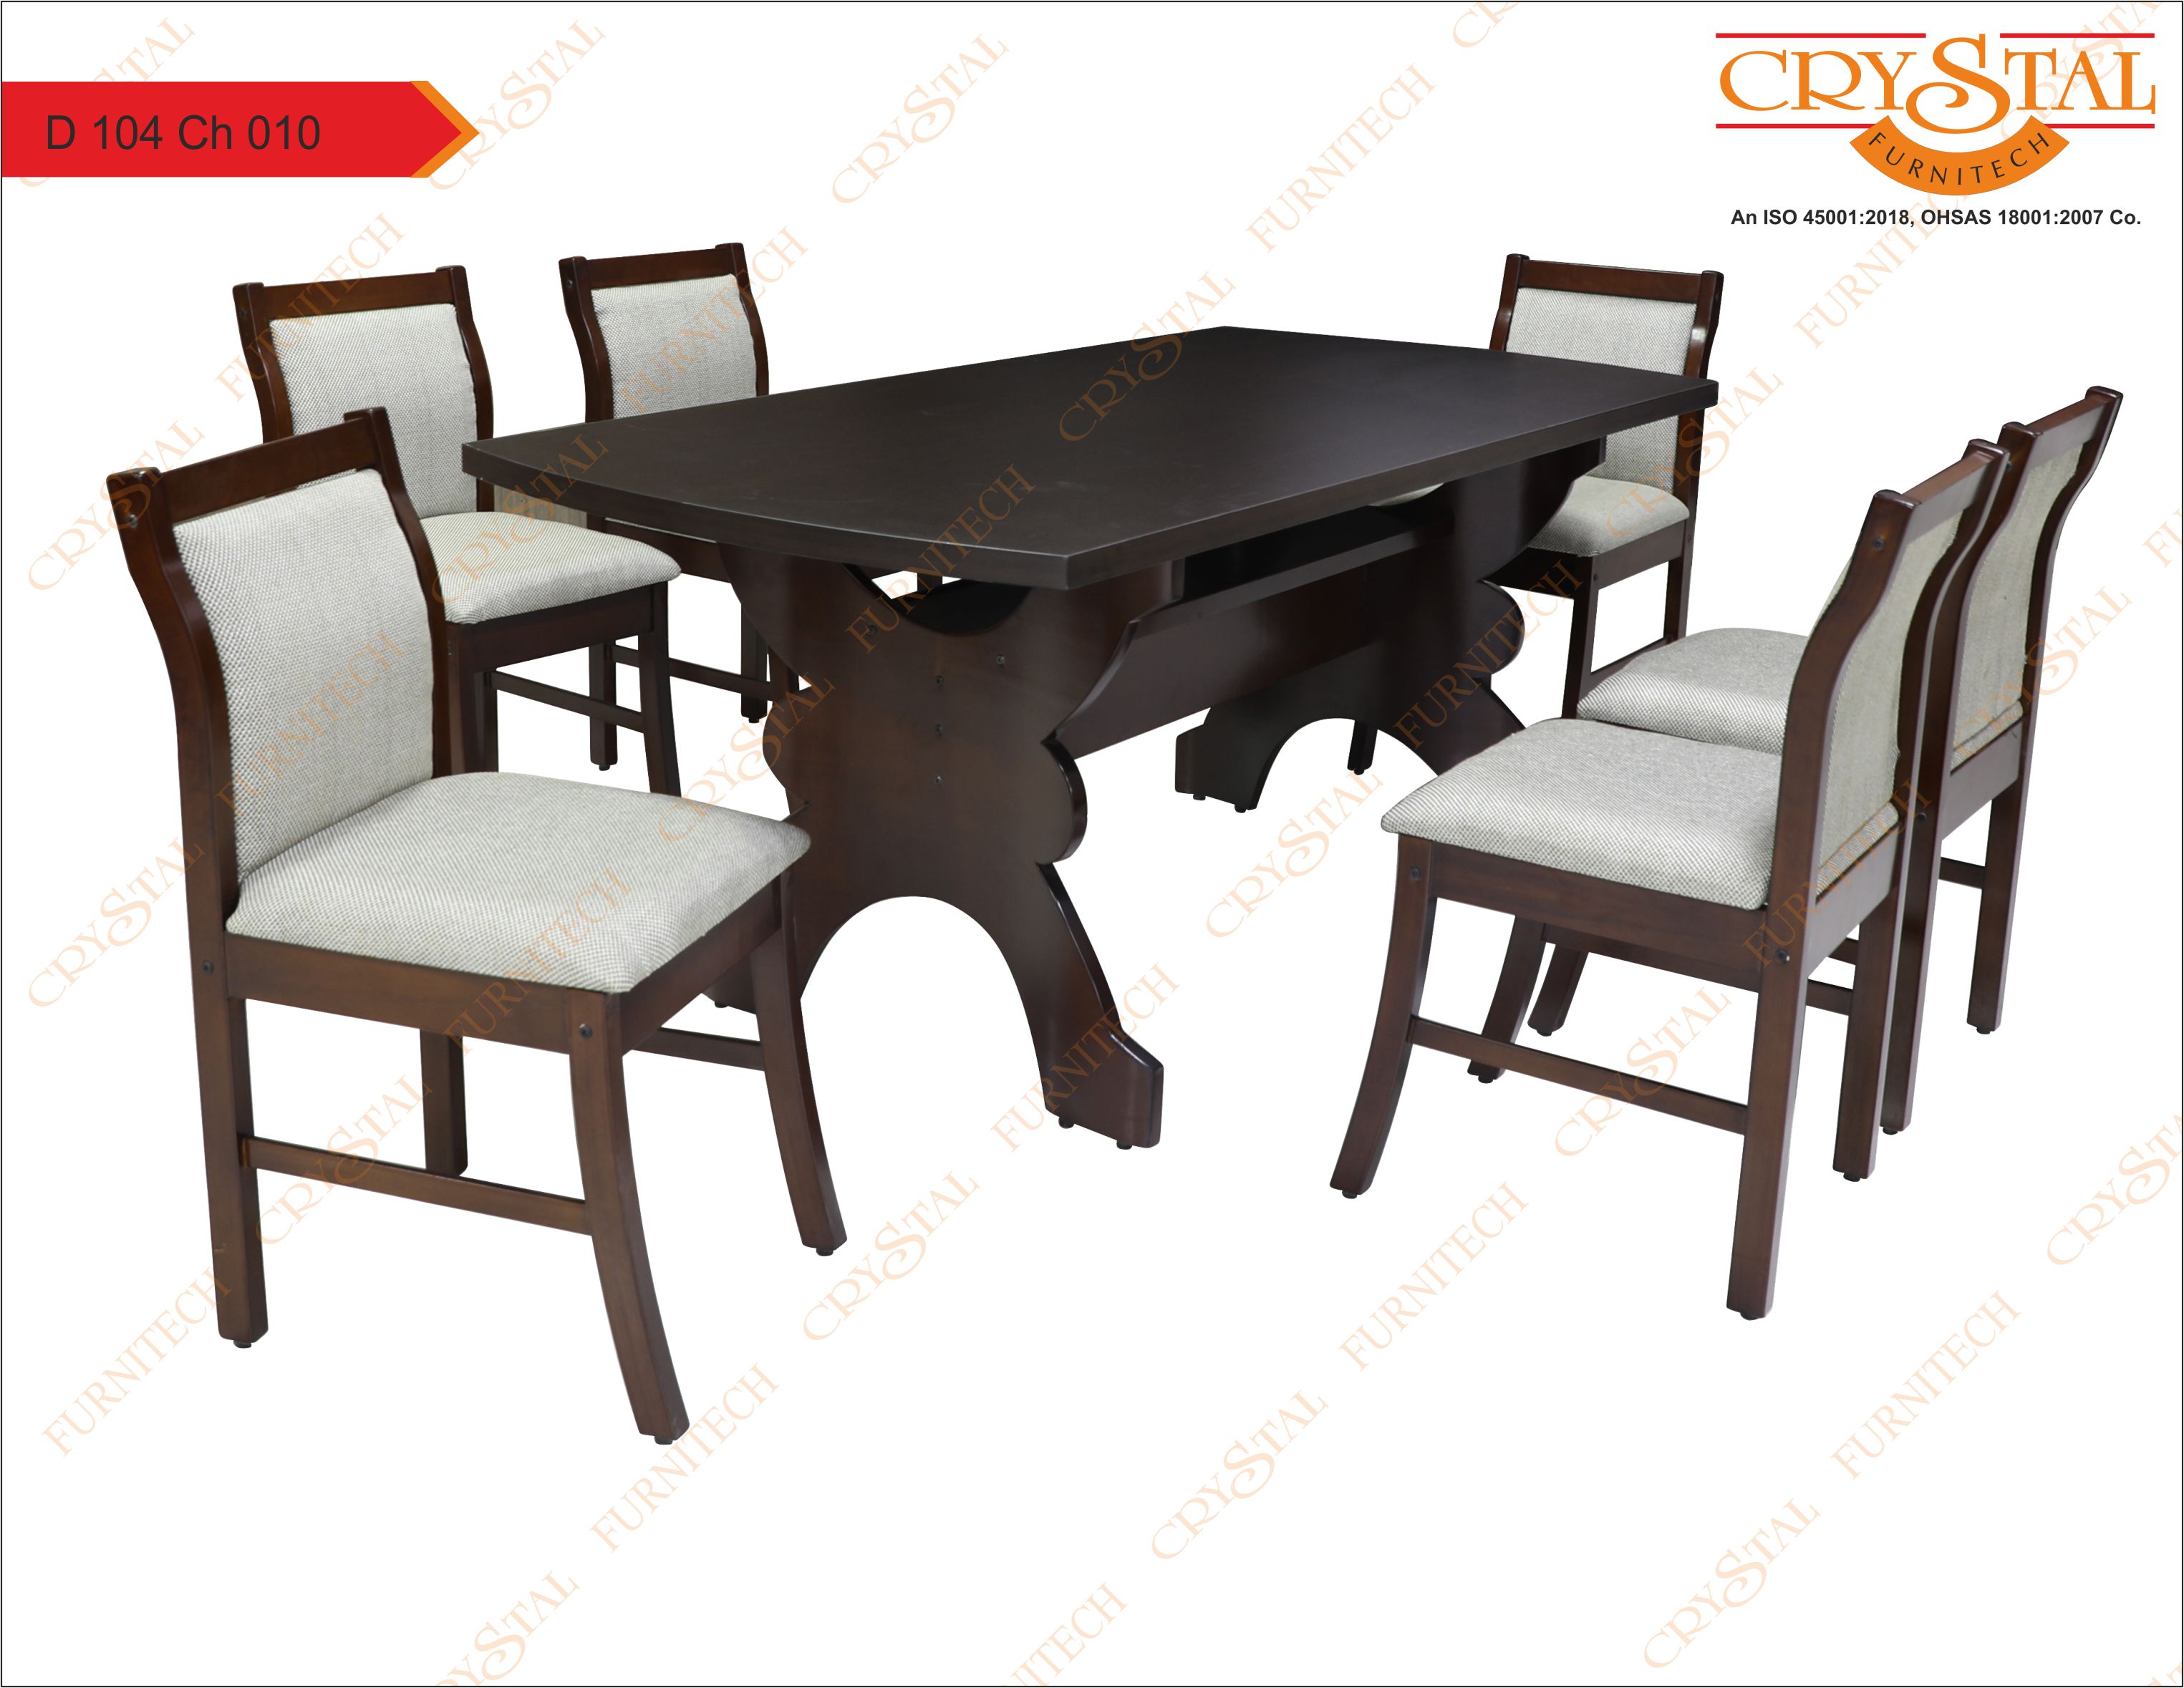 images/products/Dining-Set-Dining-Set-D-104+CH-010_1657002435.jpg